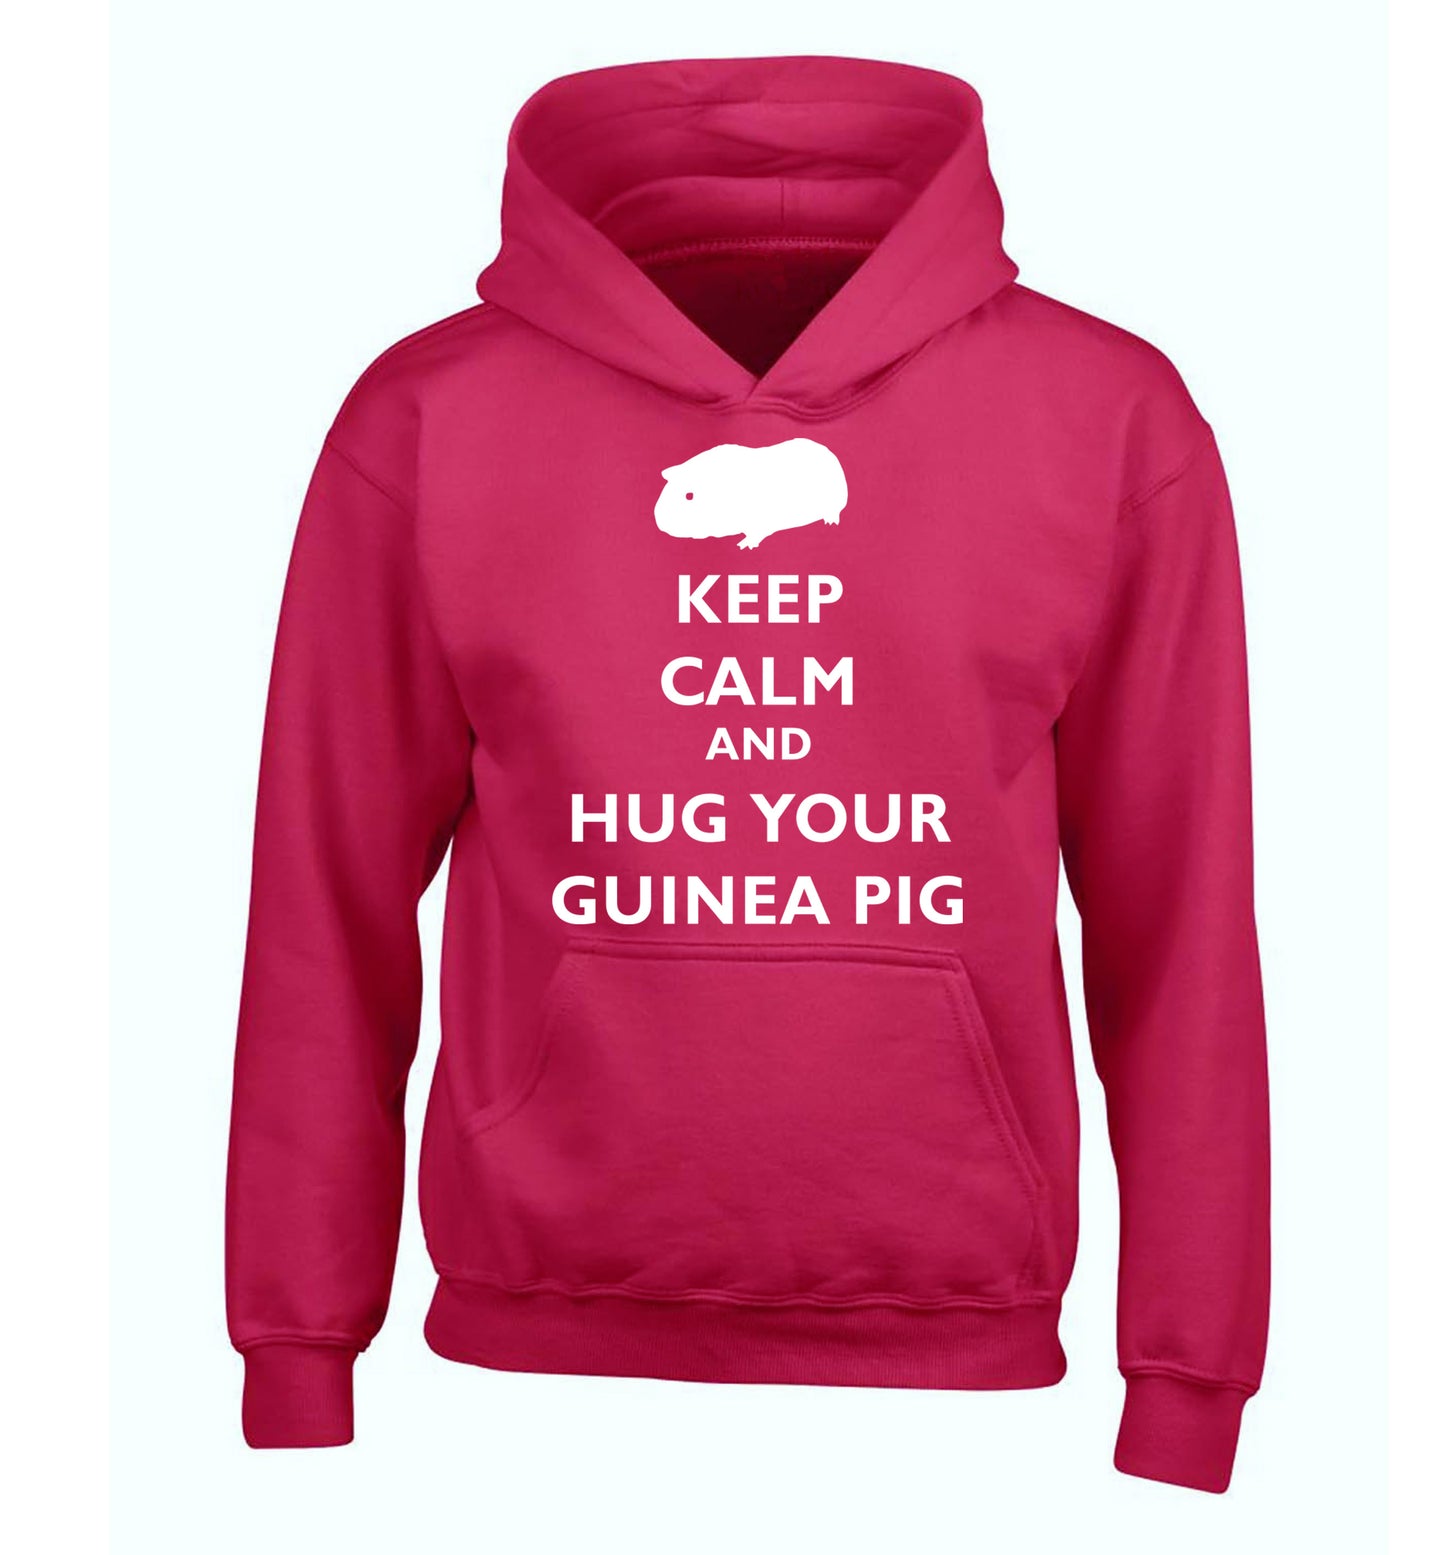 Keep calm and hug your guineapig children's pink hoodie 12-13 Years